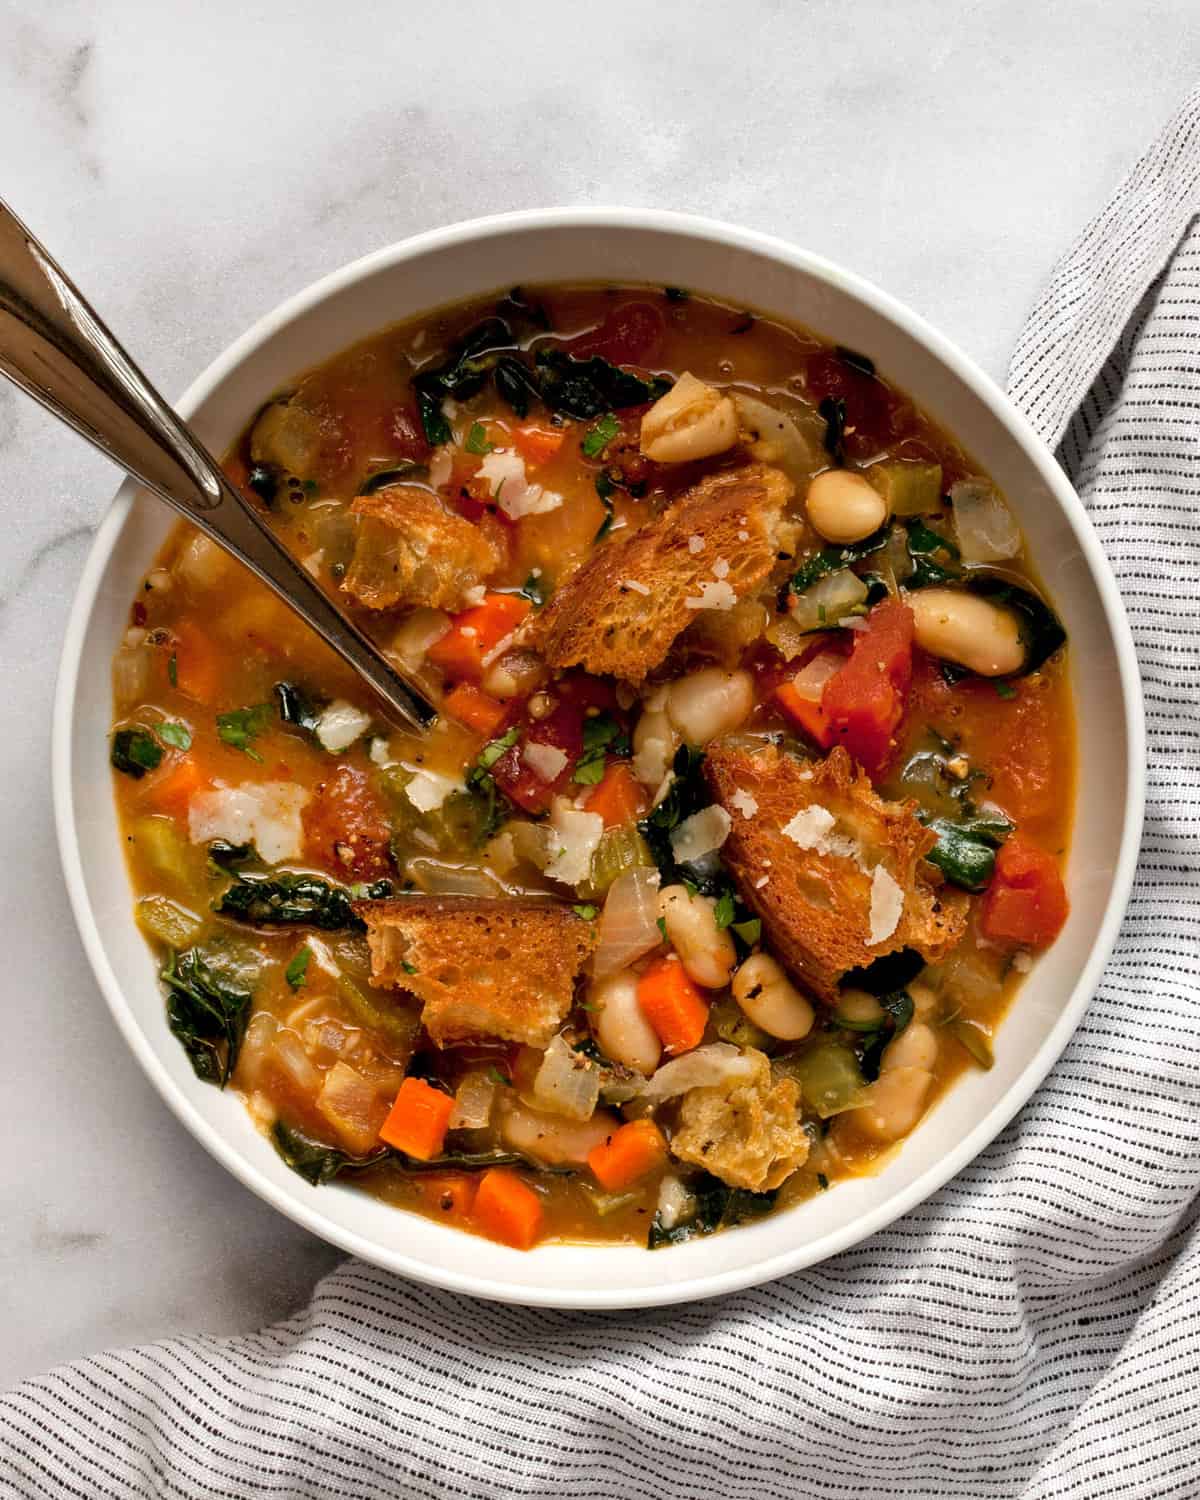 Tuscan White Bean Soup Recipe from https://www.lastingredient.com/